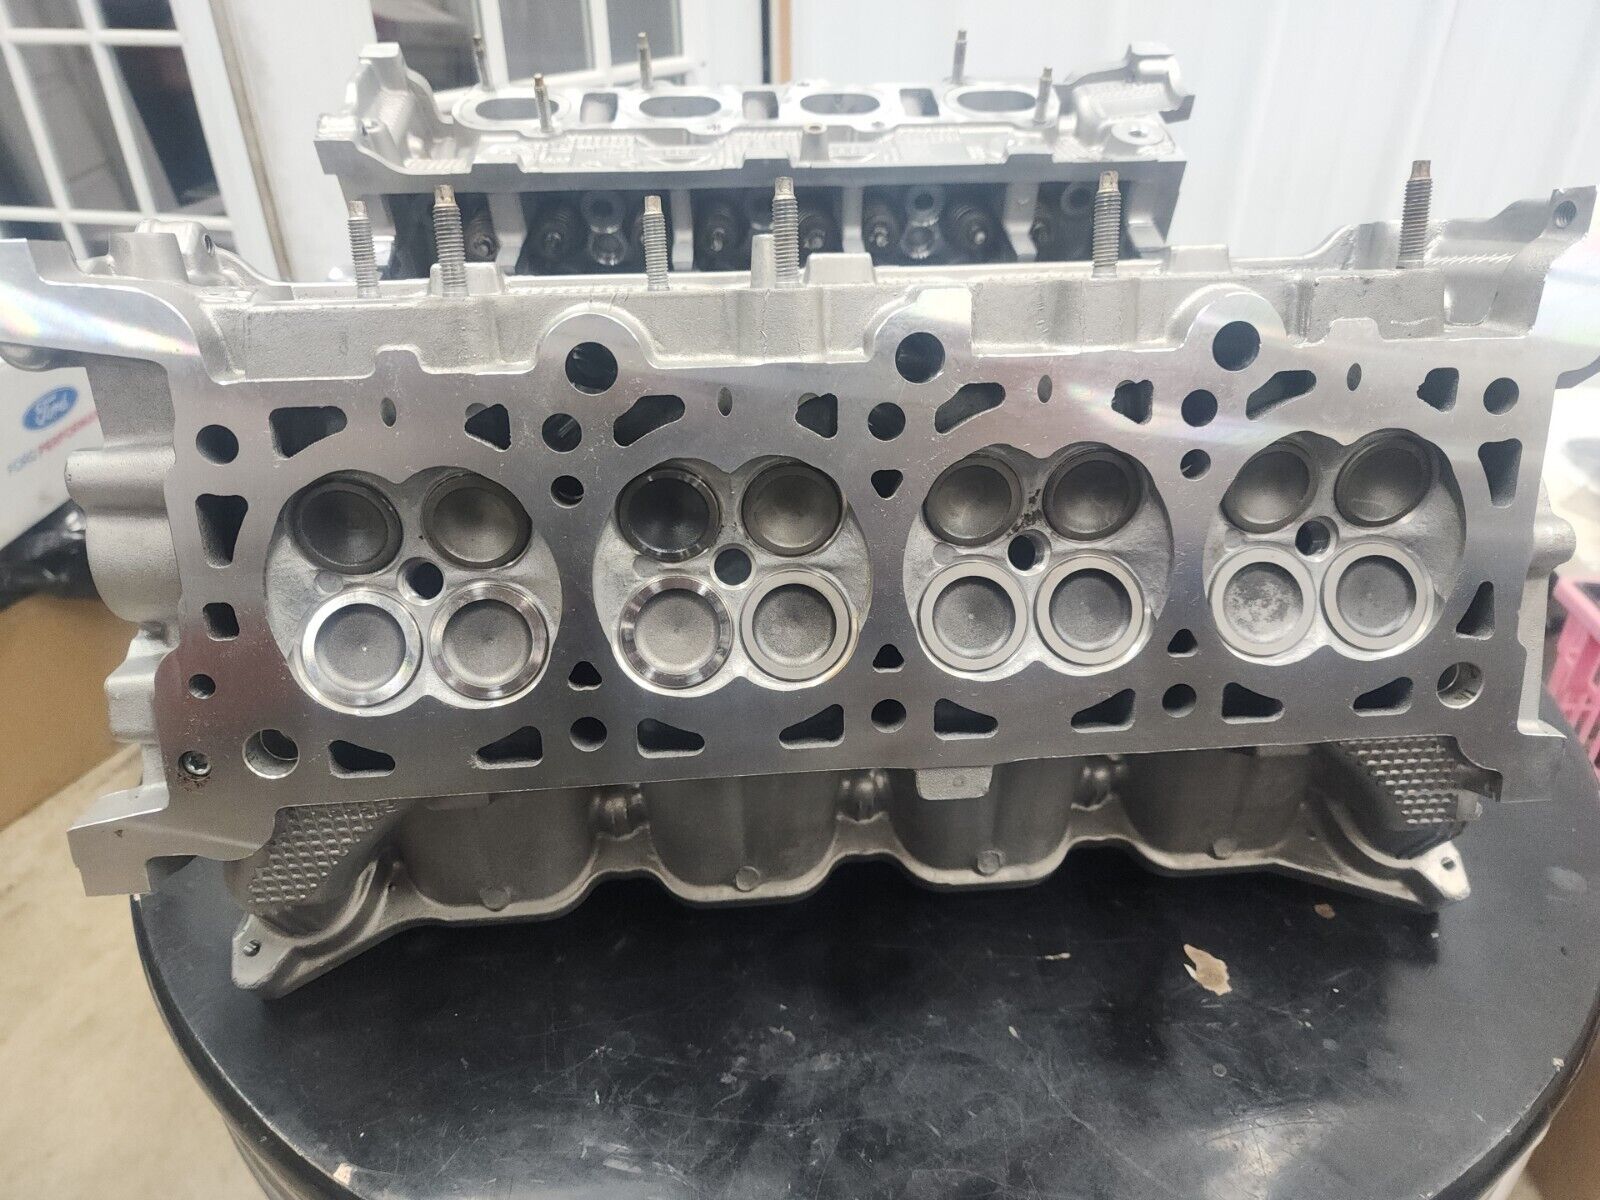 GT-500 shelby cylinder heads 5.8 2013 2014 ford gt engine motor mustang 